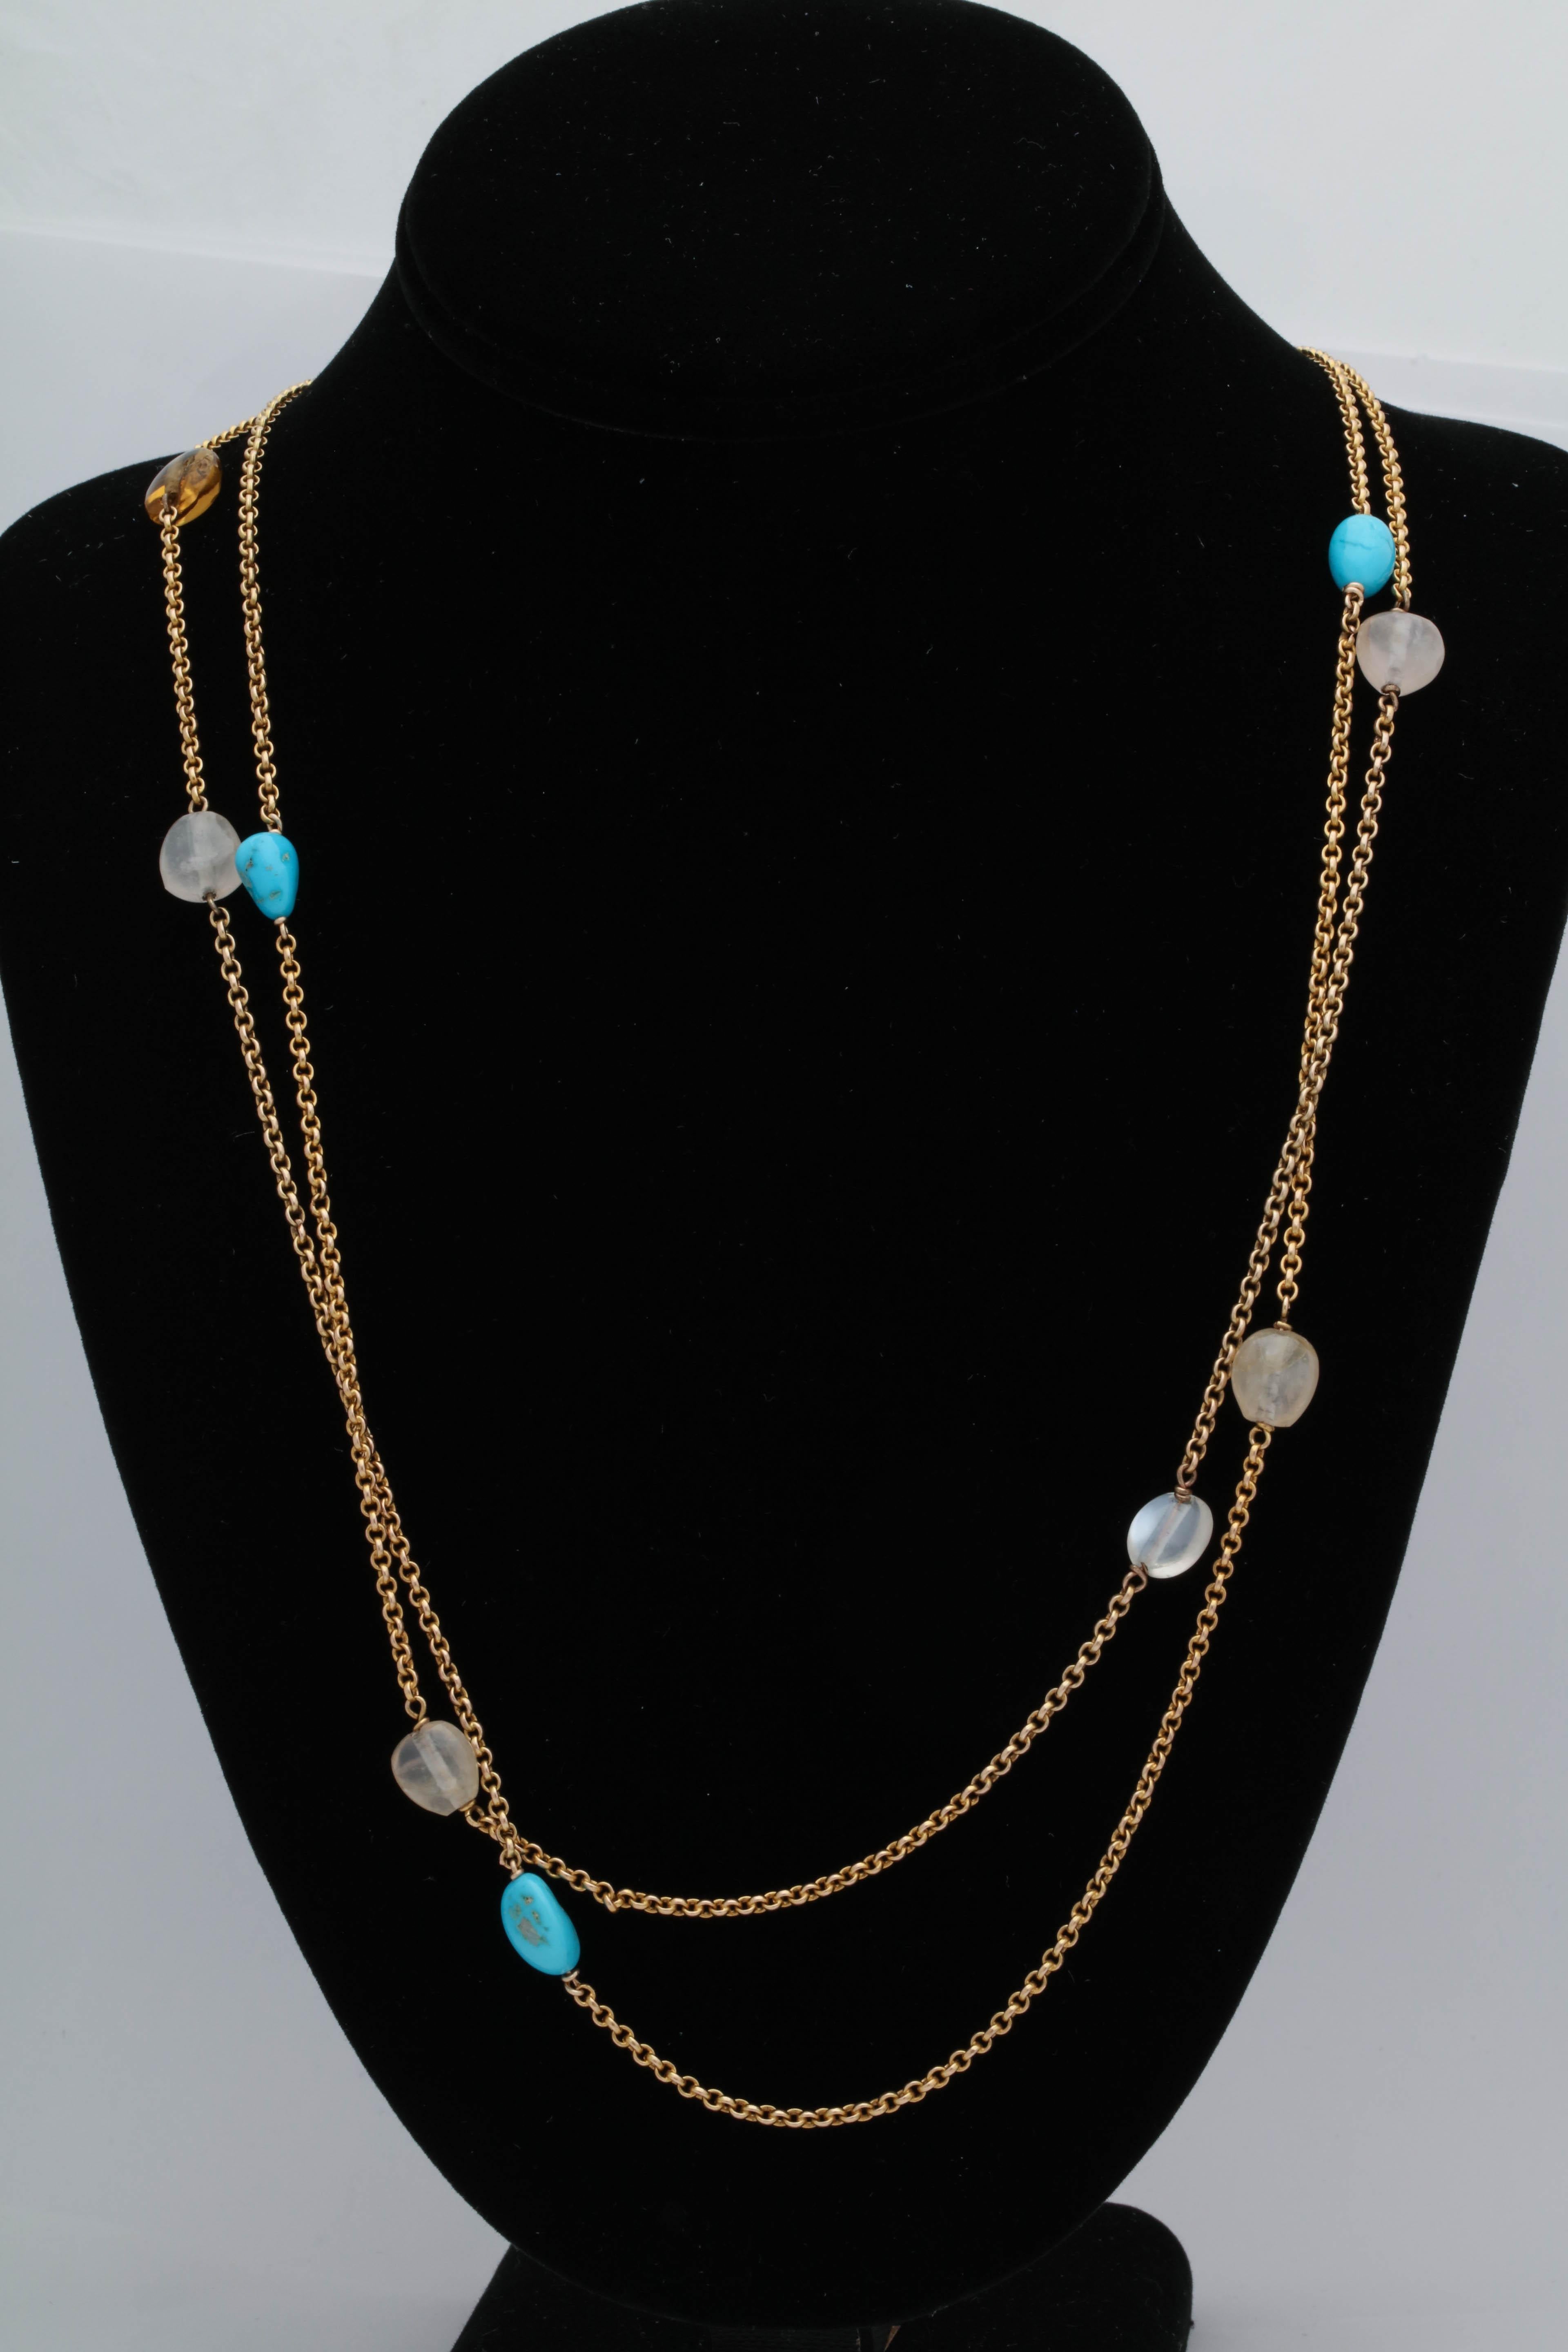 One Ladies 18kt Yellow Gold Box Link Chain Necklace Sporadically Embellished With Fourteen 8MM Semi Precious Stones. Stones Consist Of The Following :Three Turquoises, Two Amethysts,Four Moonstones ,Two Citrines,& Three White Quartz.All Stones Set